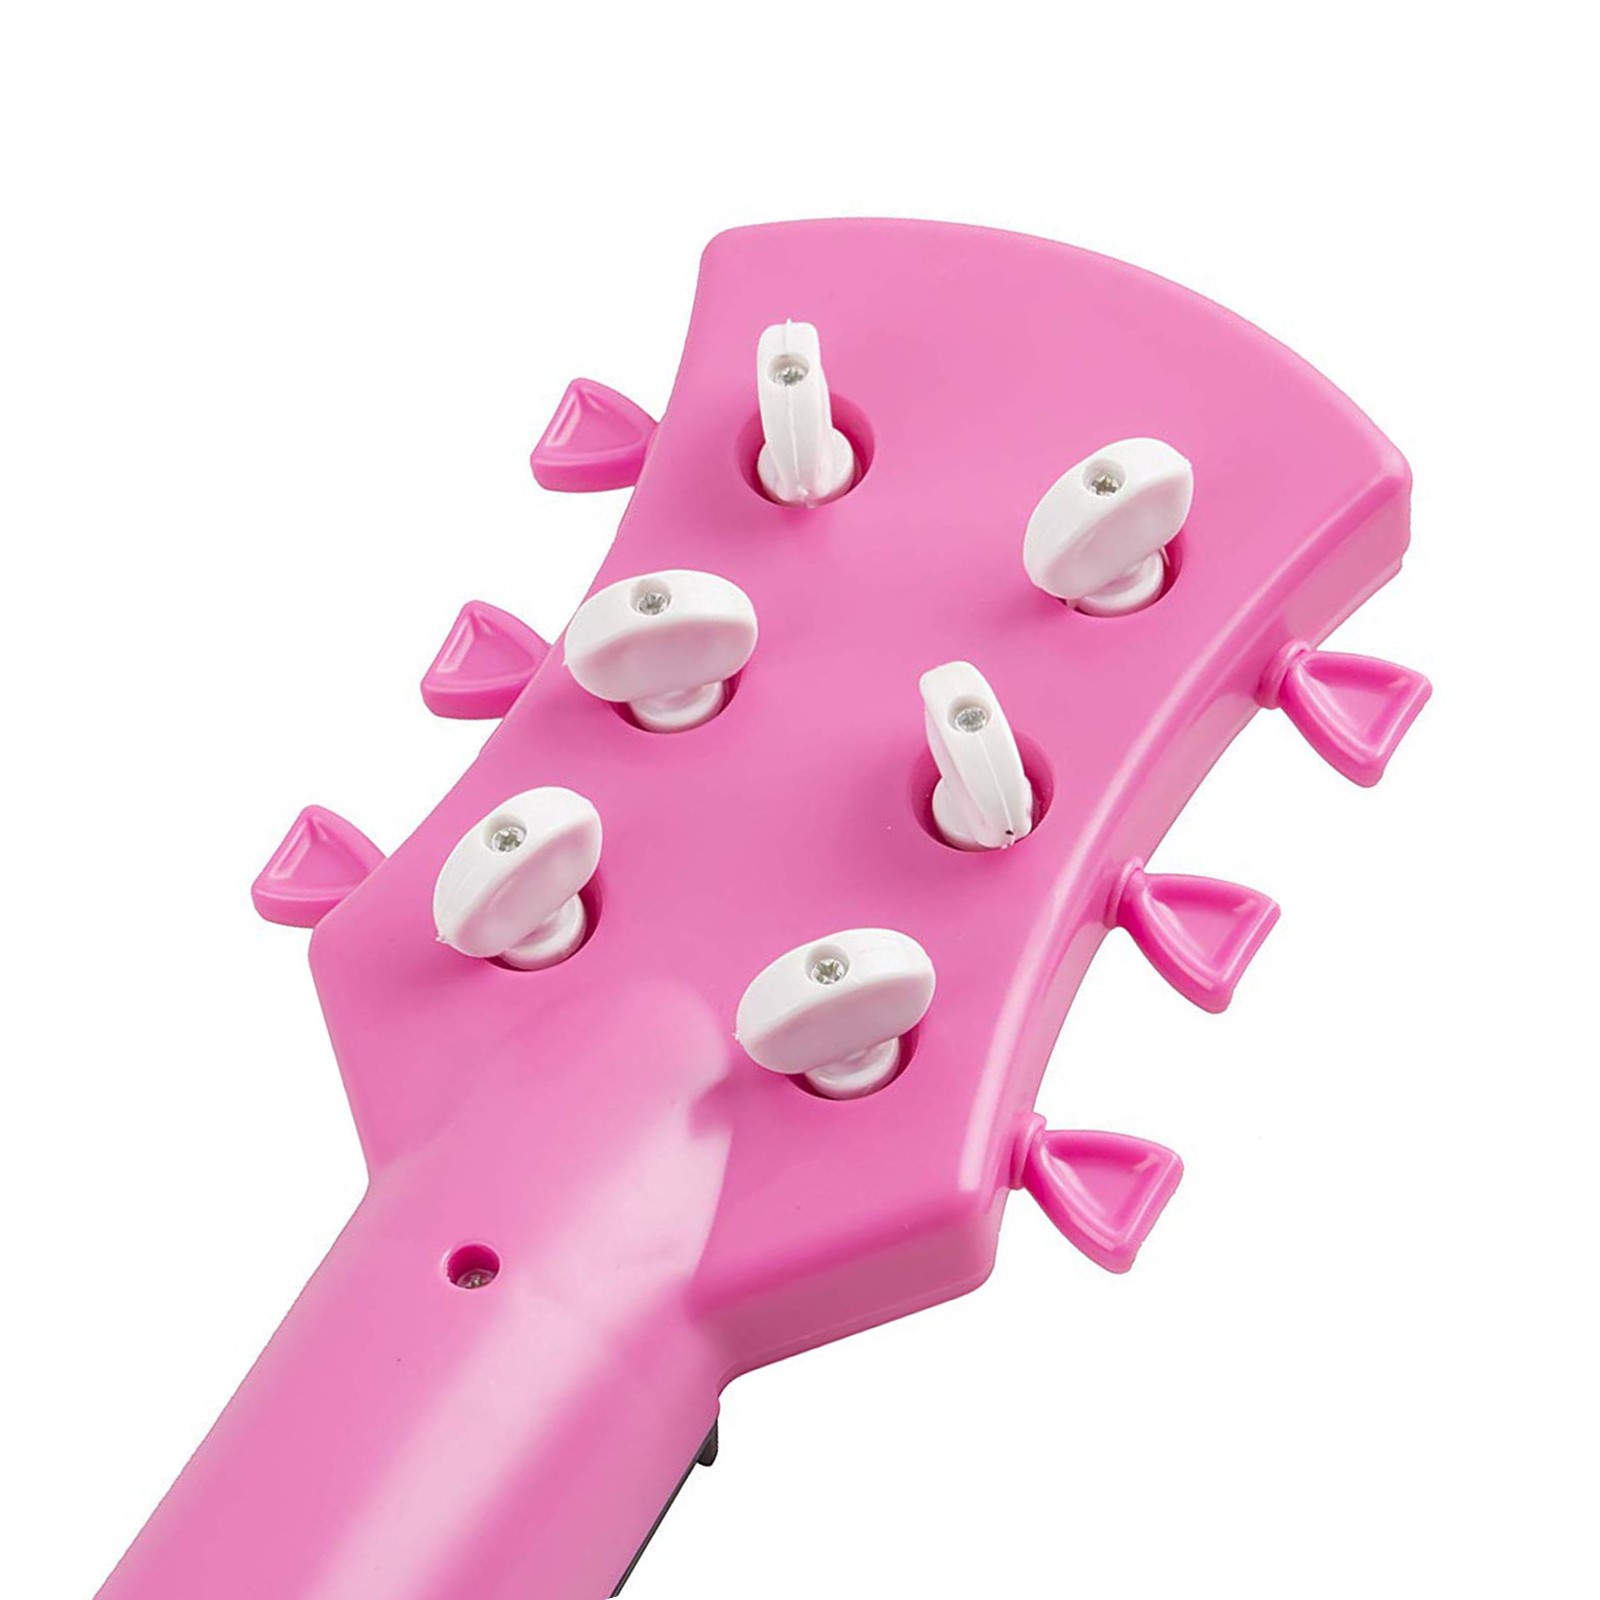 Toy Guitar Rock Star 6 String Acoustic Kids 255 Ukulele With Guitar Pick Childrens Musical Instrument Vibrant Sound Tunable Strings Educational And Perfect For Learning How To Play Pink Color 77-03P